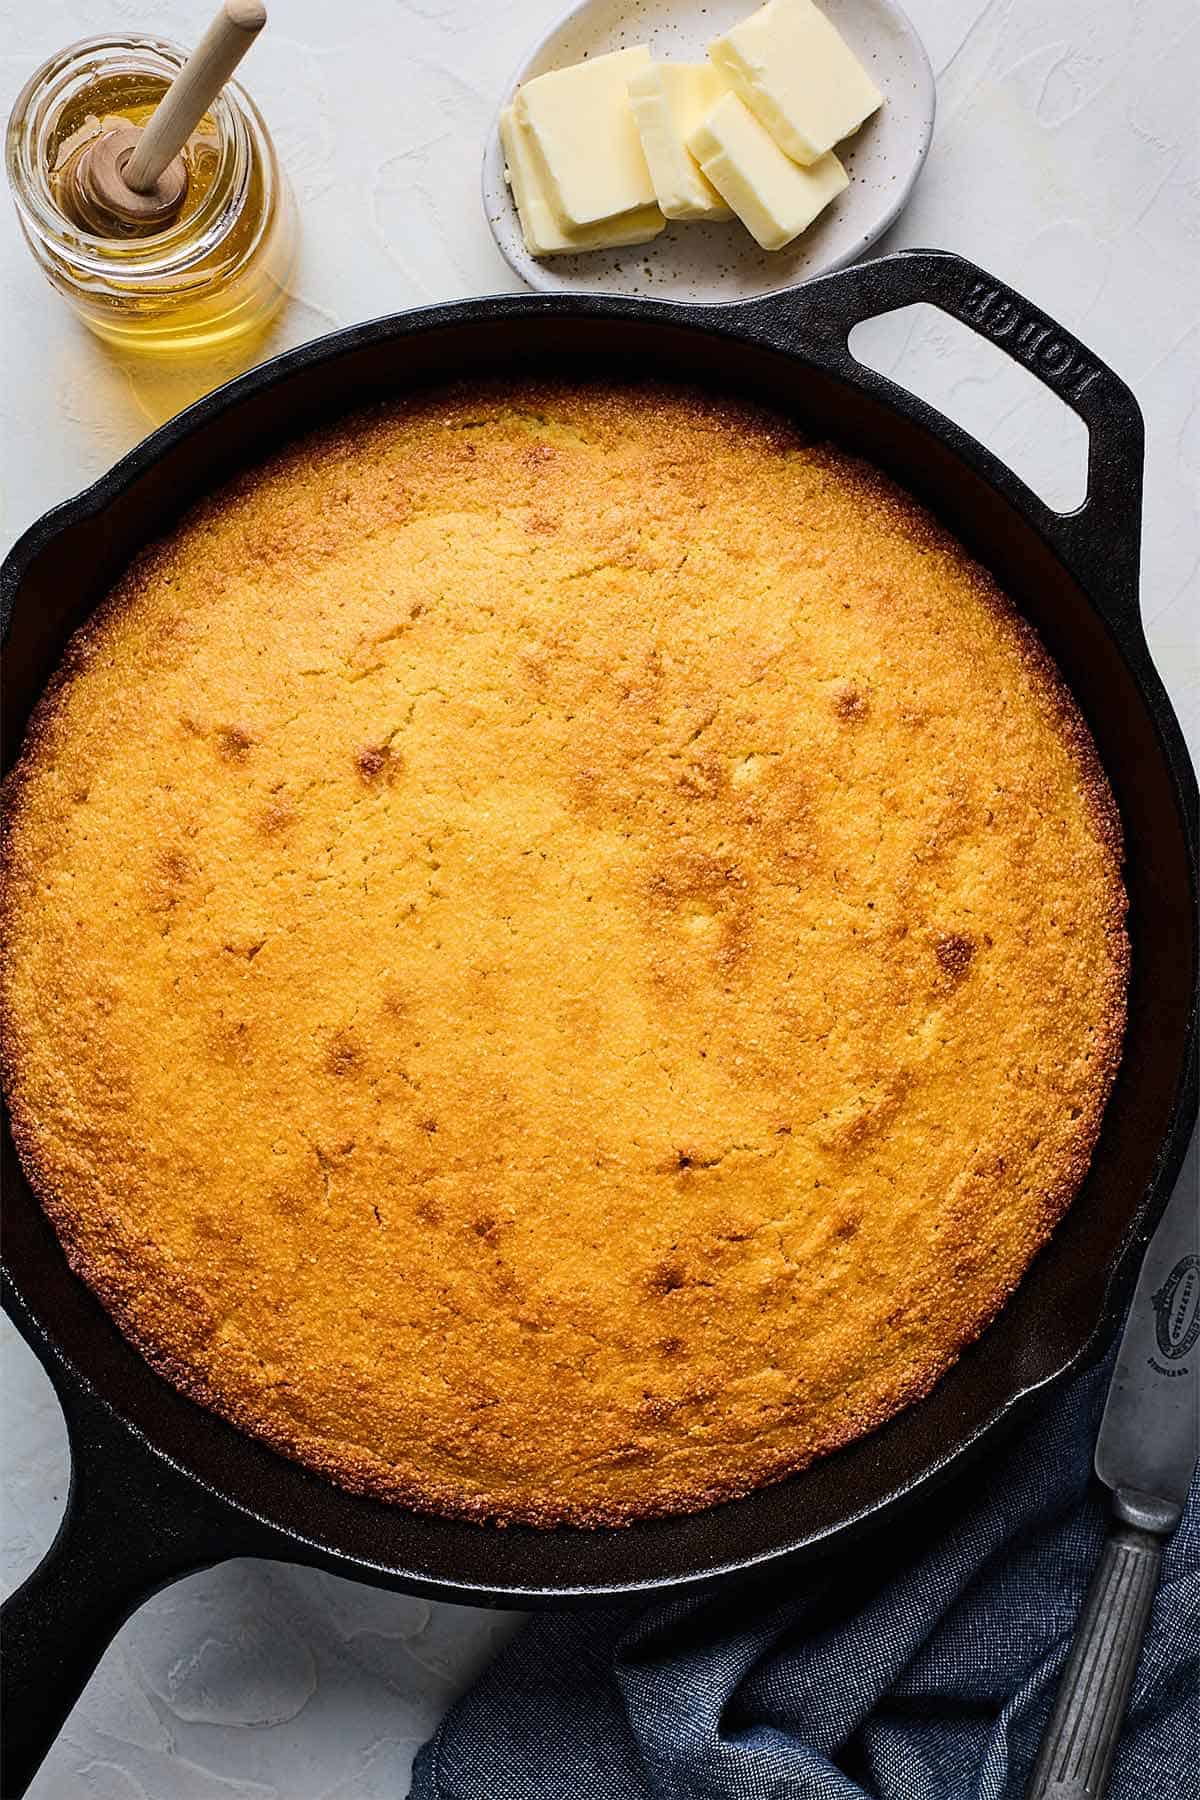 Two slices of honey cornbread recipe with butter and syrup ready to eat